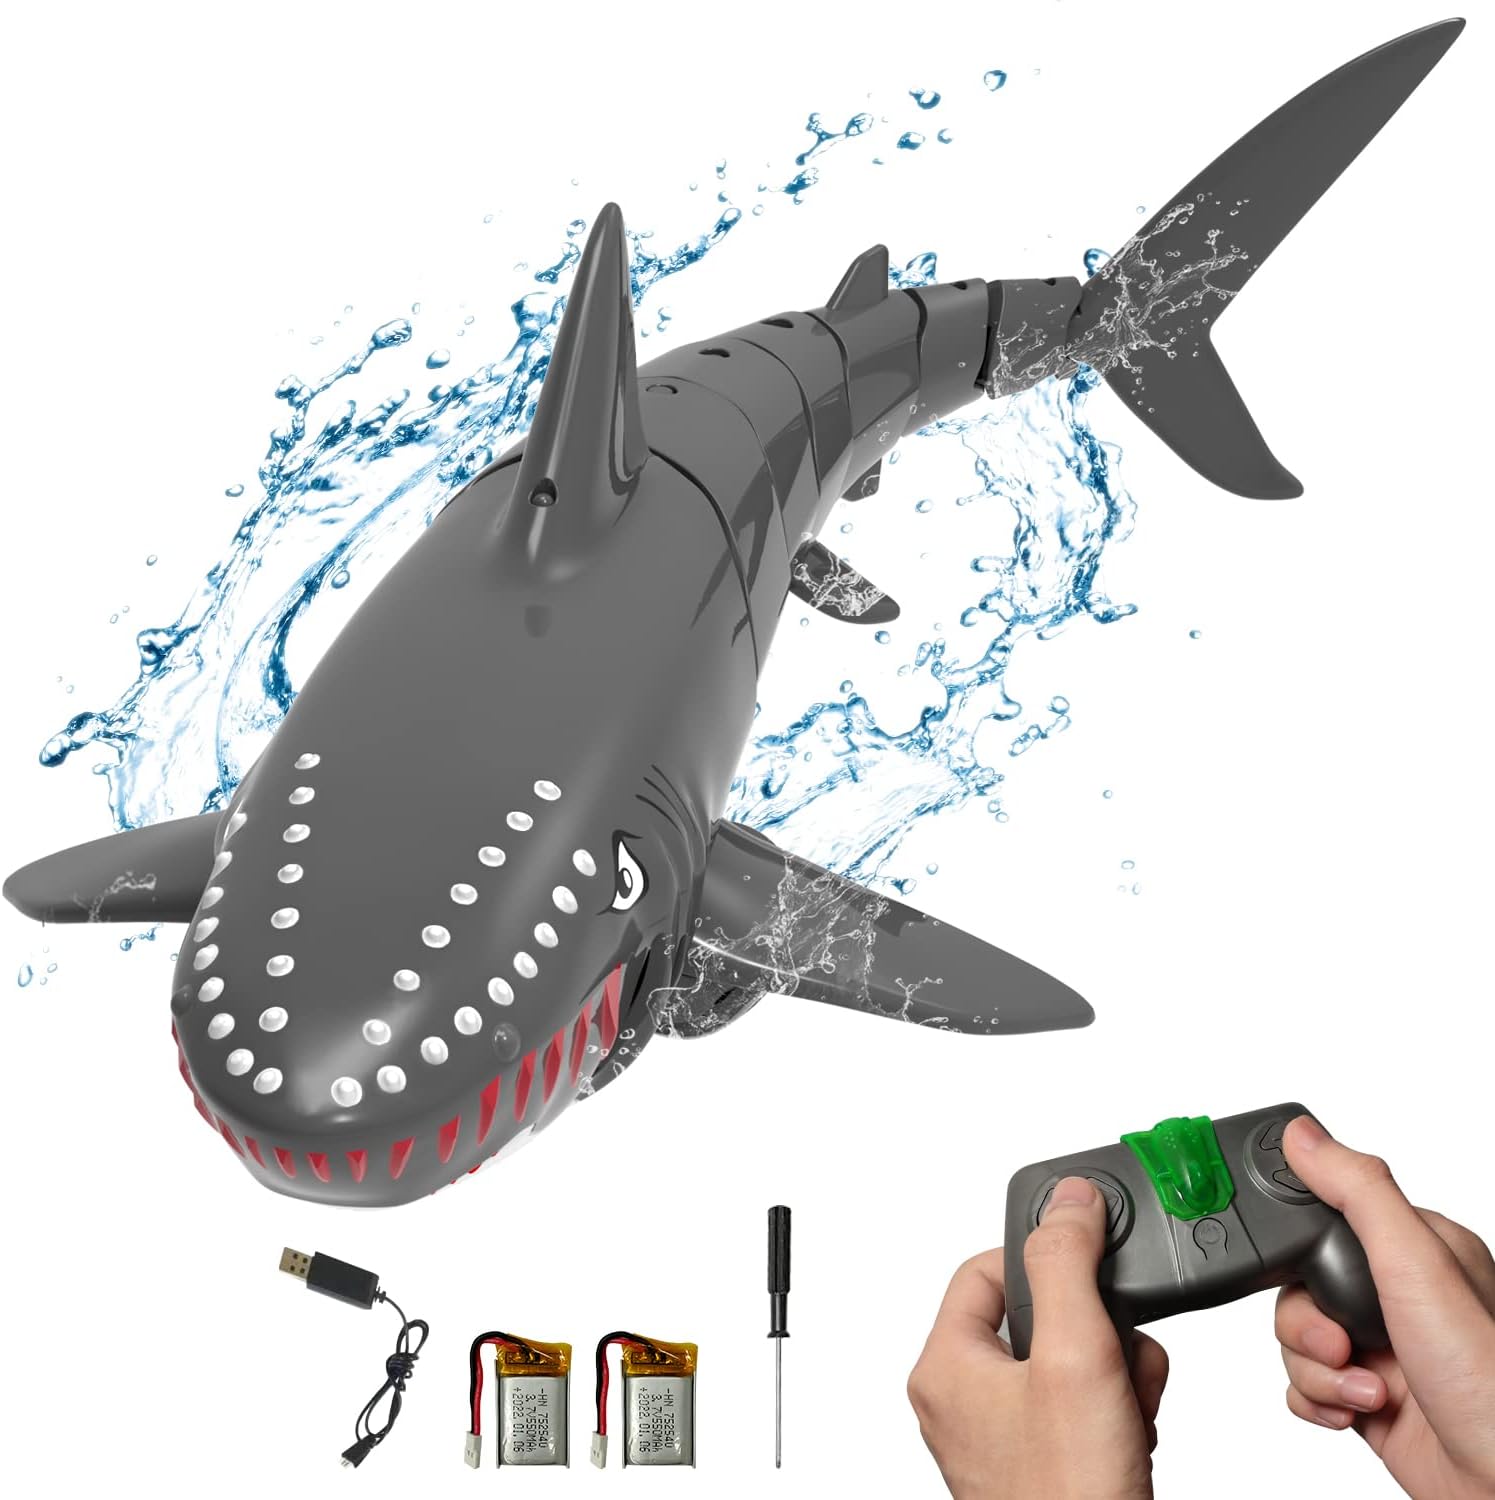 Waterproof RC Shark Radio Control Toy Remote Control Boat RC Boat for Kids